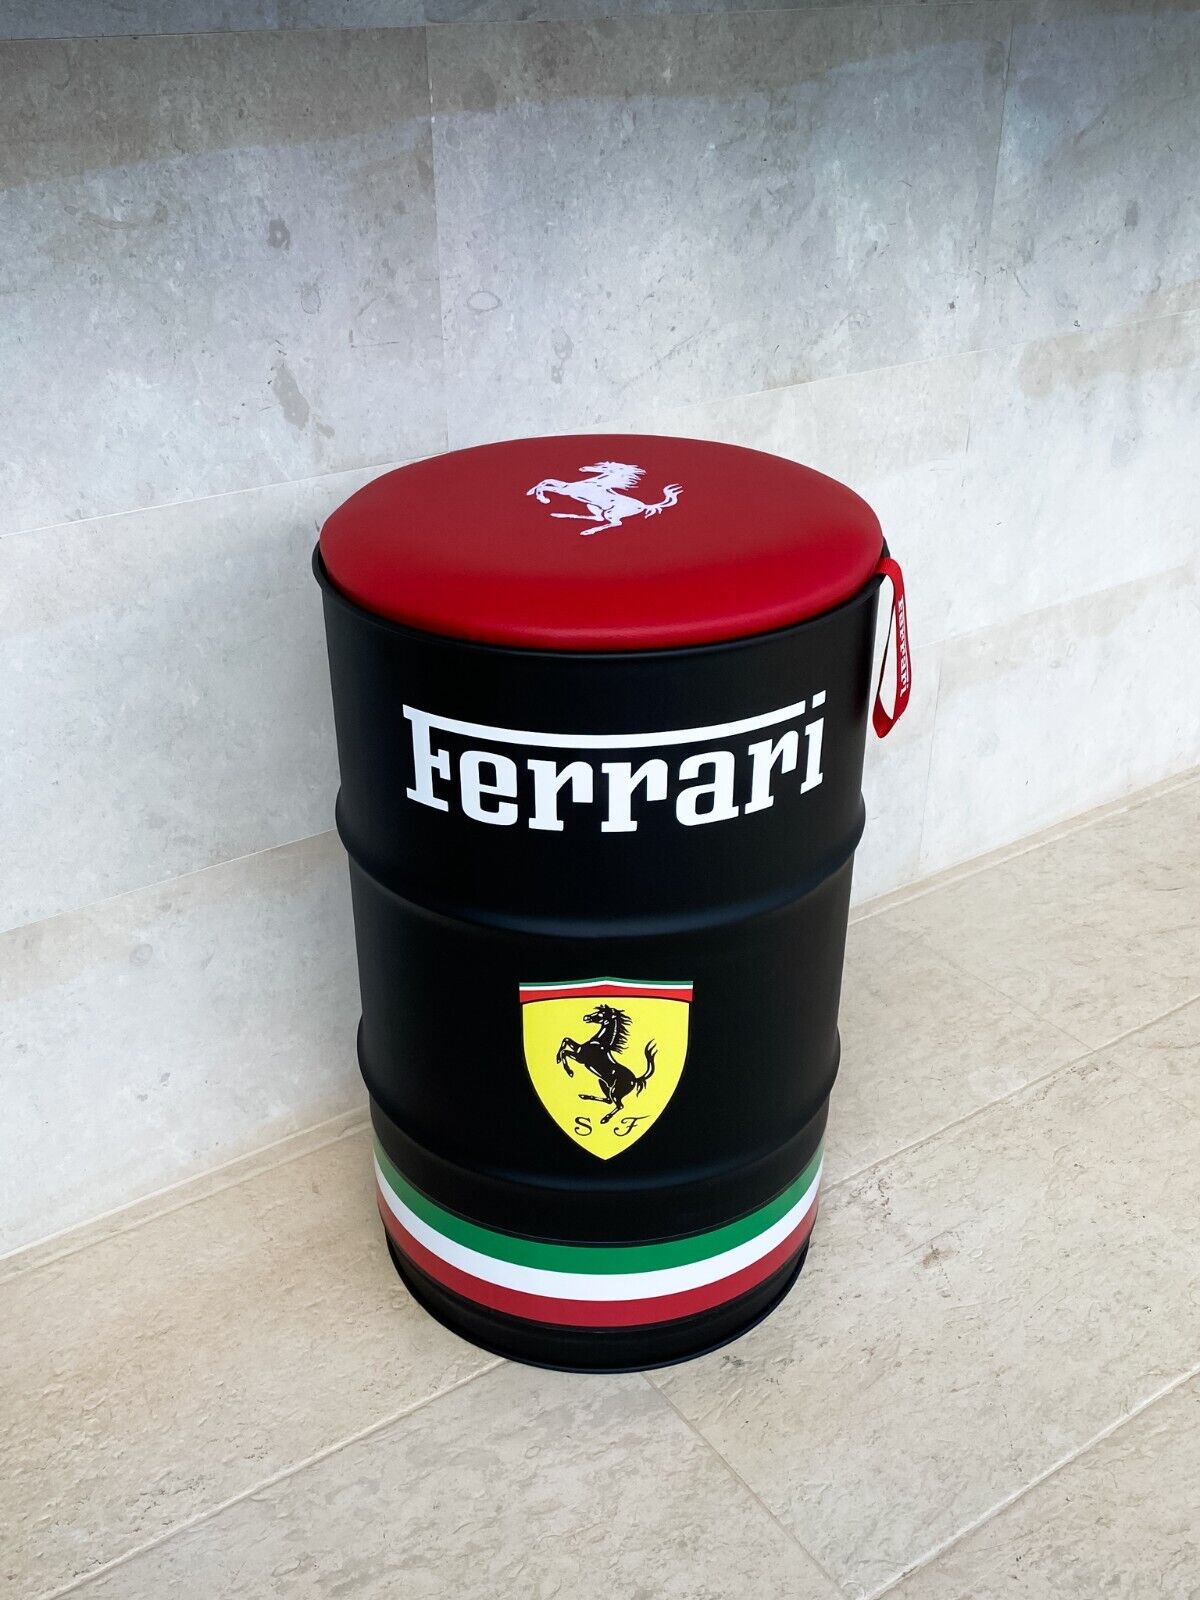 Ferrari barrel chair with a red top cover - PK Werks